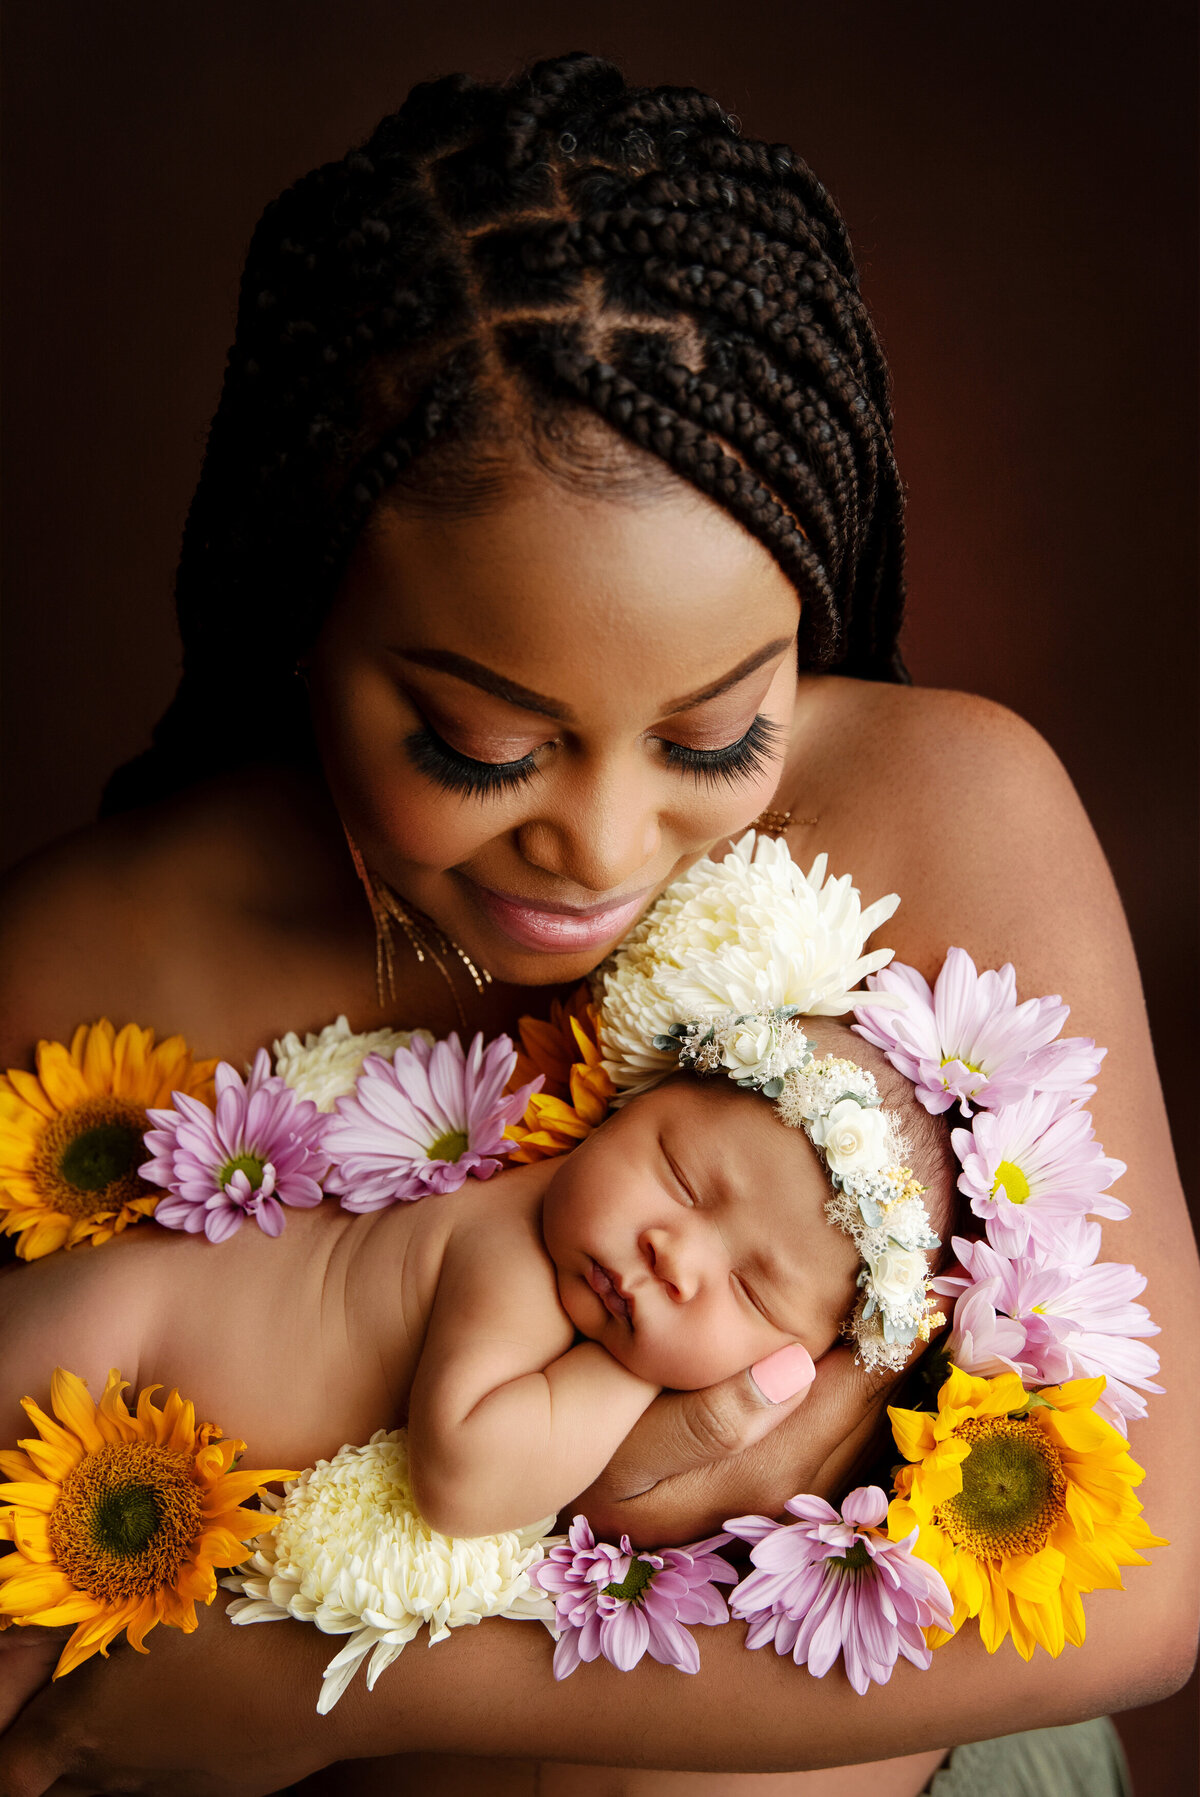 st-louis-newborn-photographer-mother-cradling-newborn-surrounding-by-fresh-flowers-and-wearing-a-flower-crown